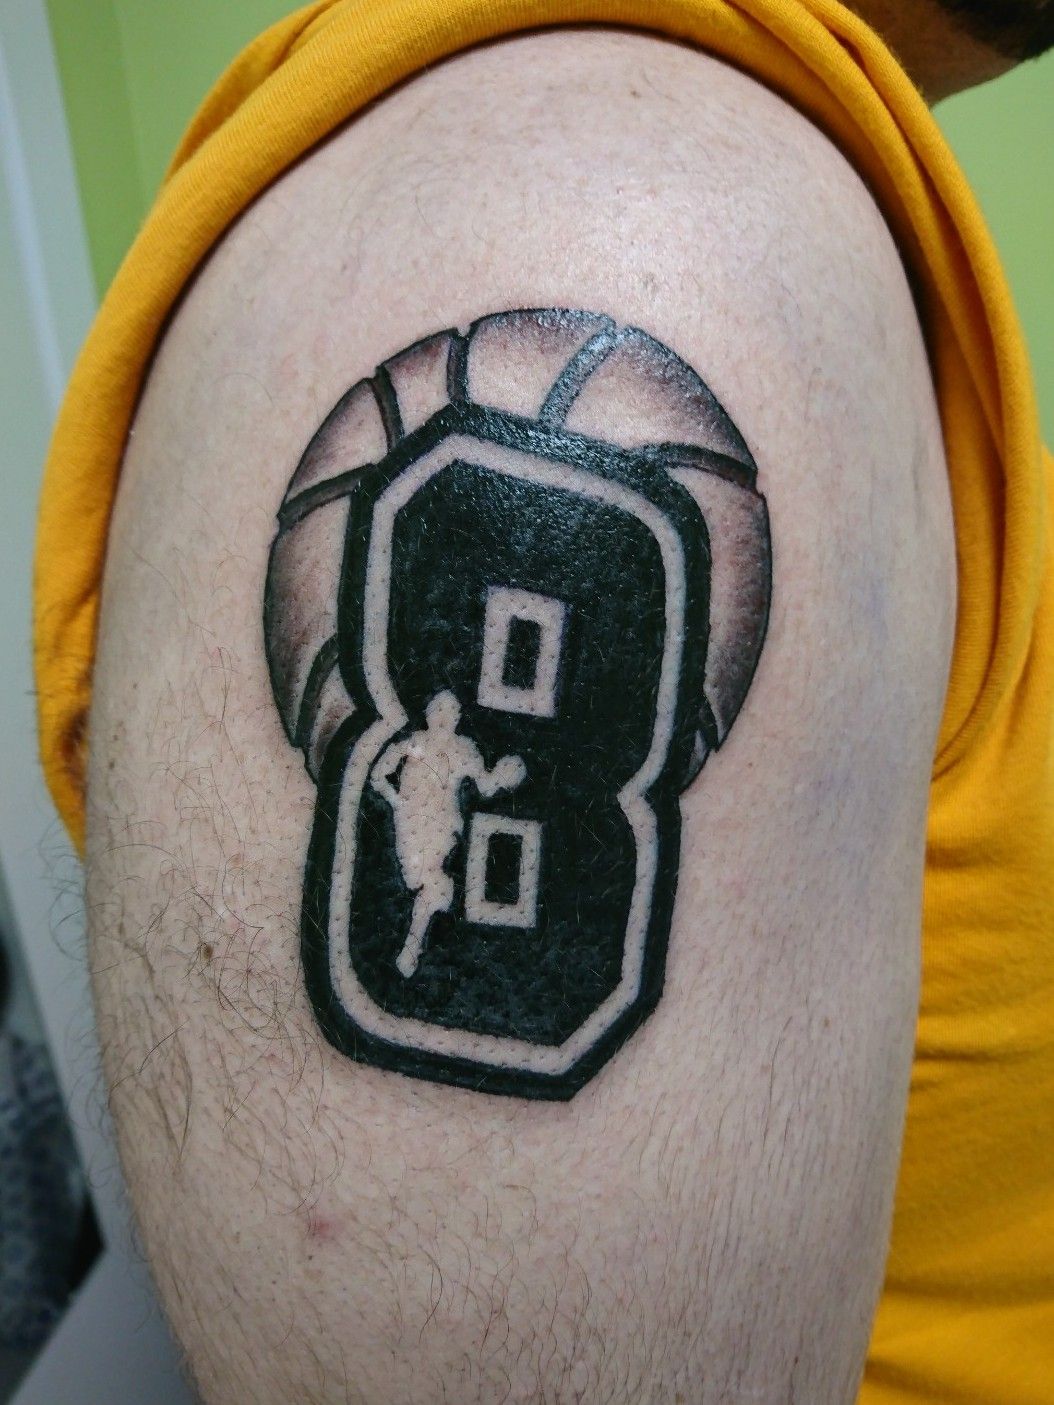 Tattoo uploaded by Praxis Tattoo VK • Number eight basketball